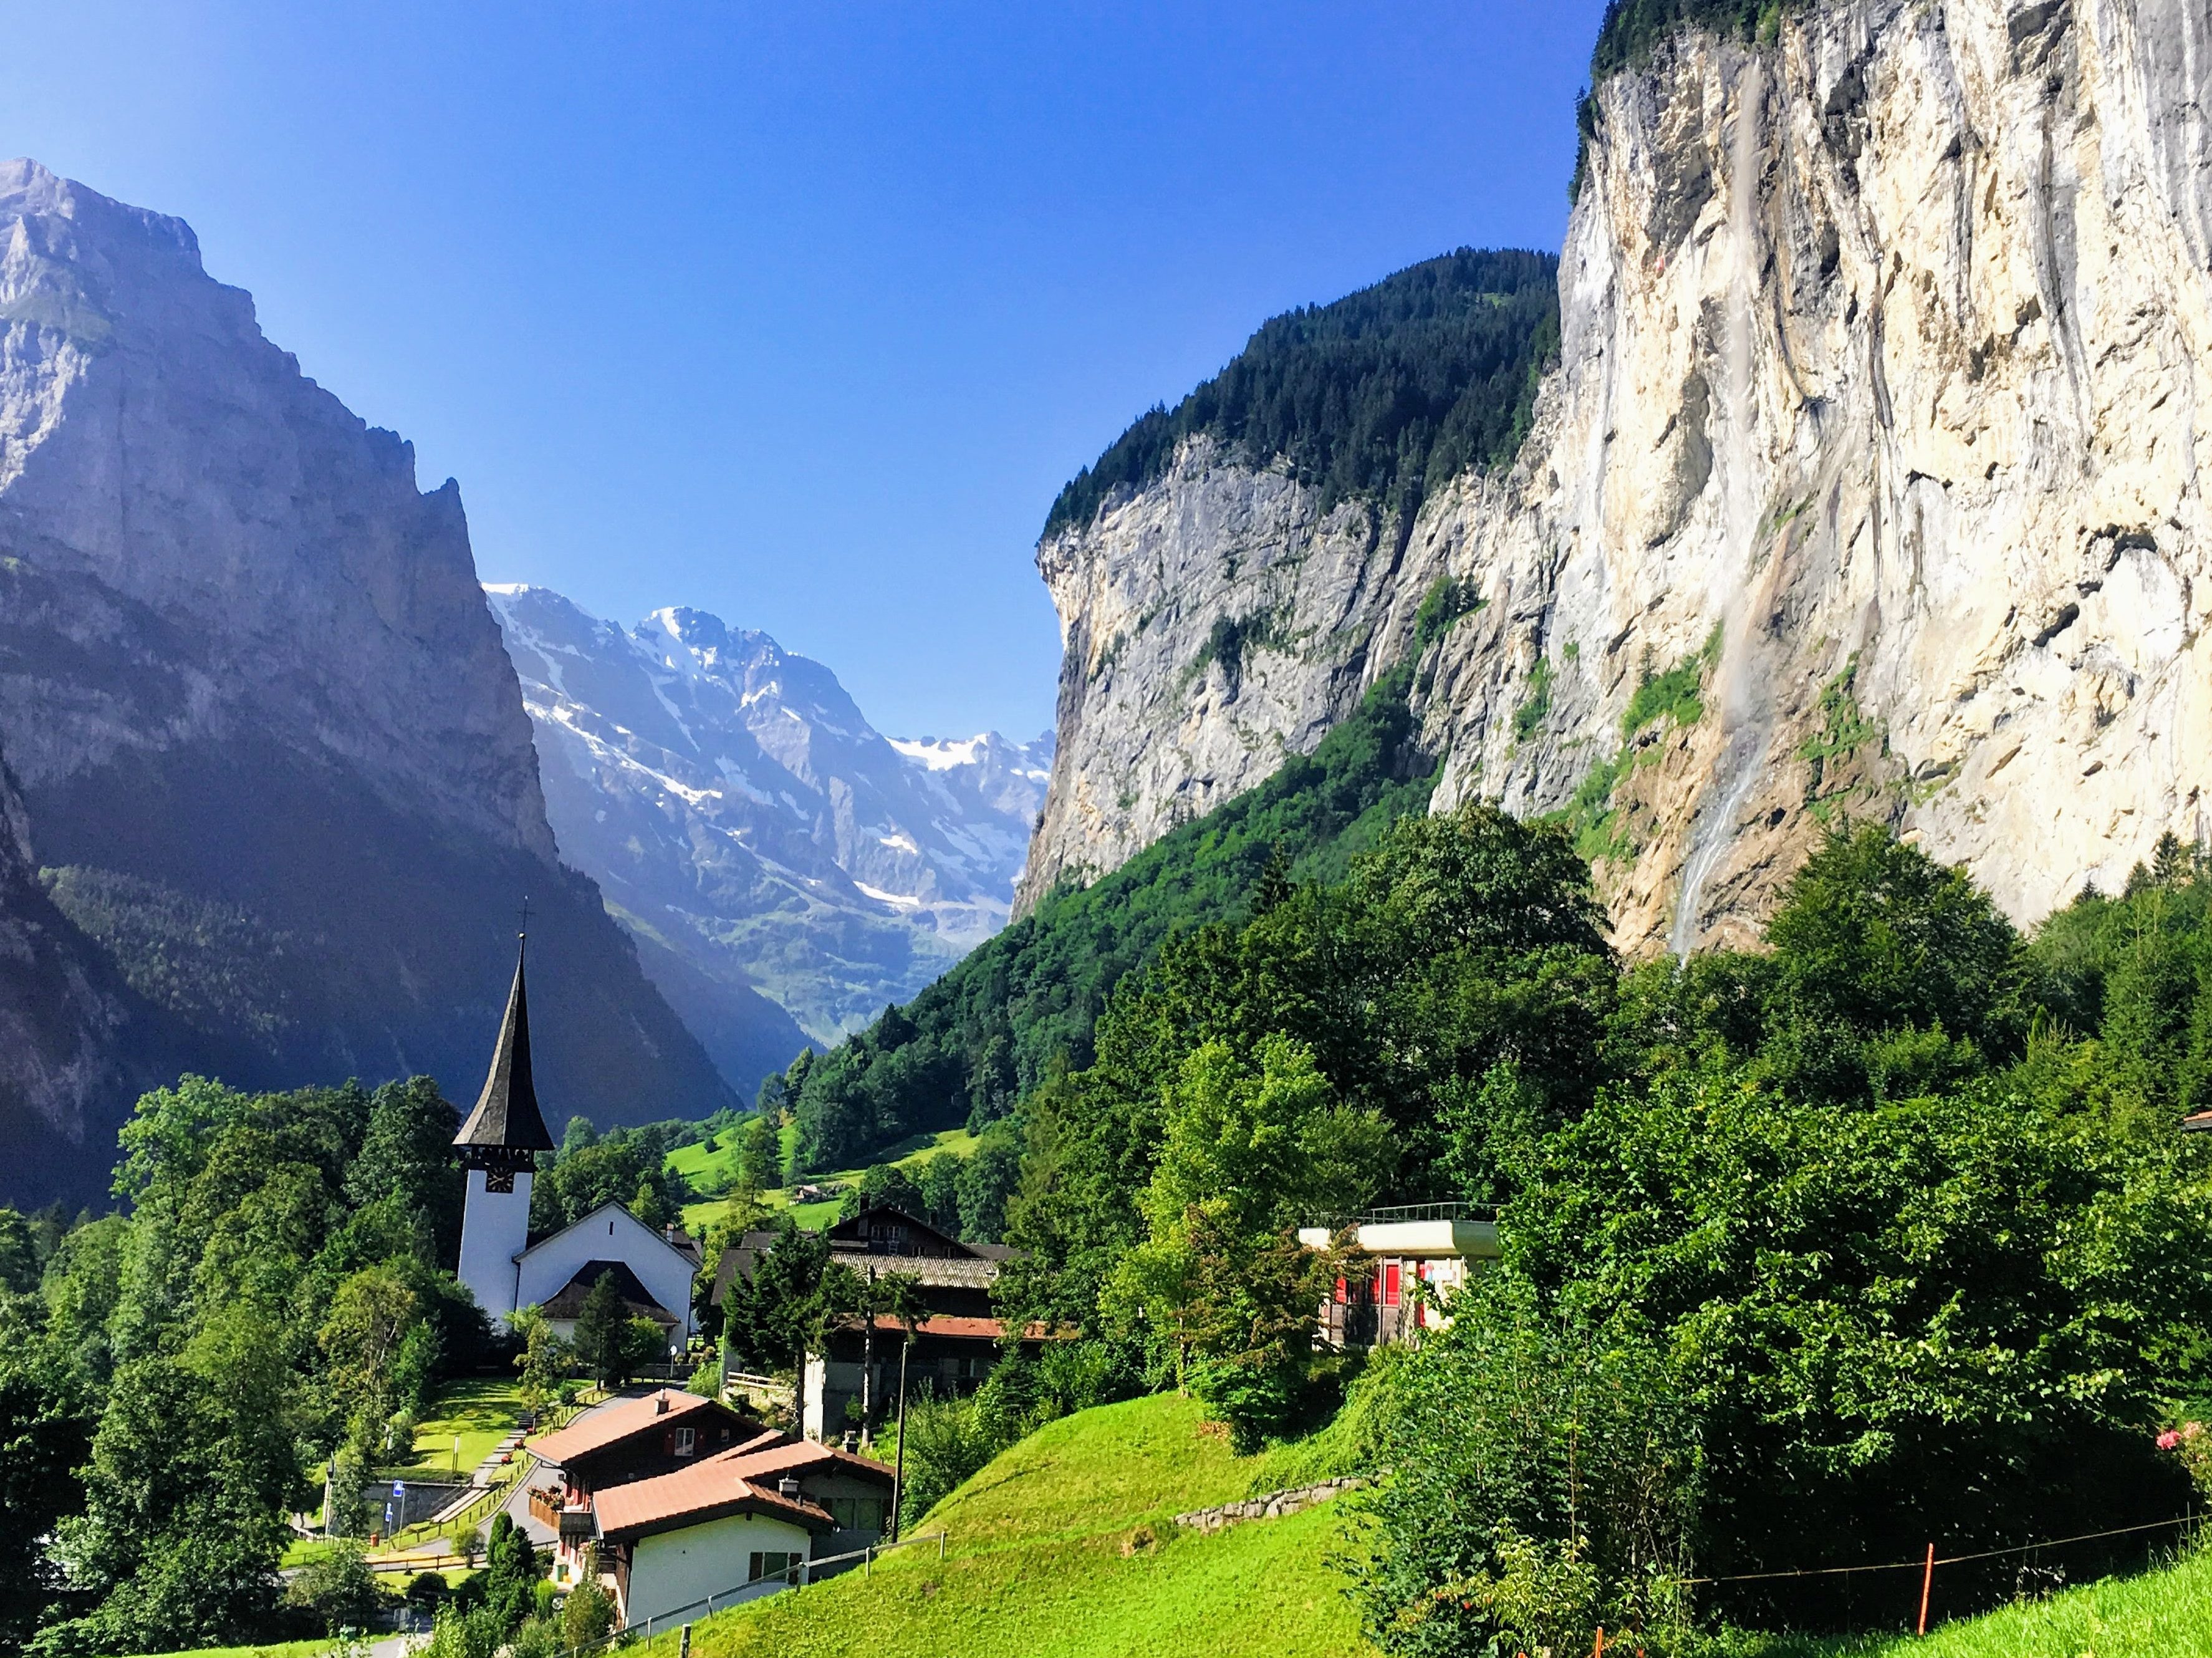 Hiking in the Swiss Alps: A Review - Switzerland Travel